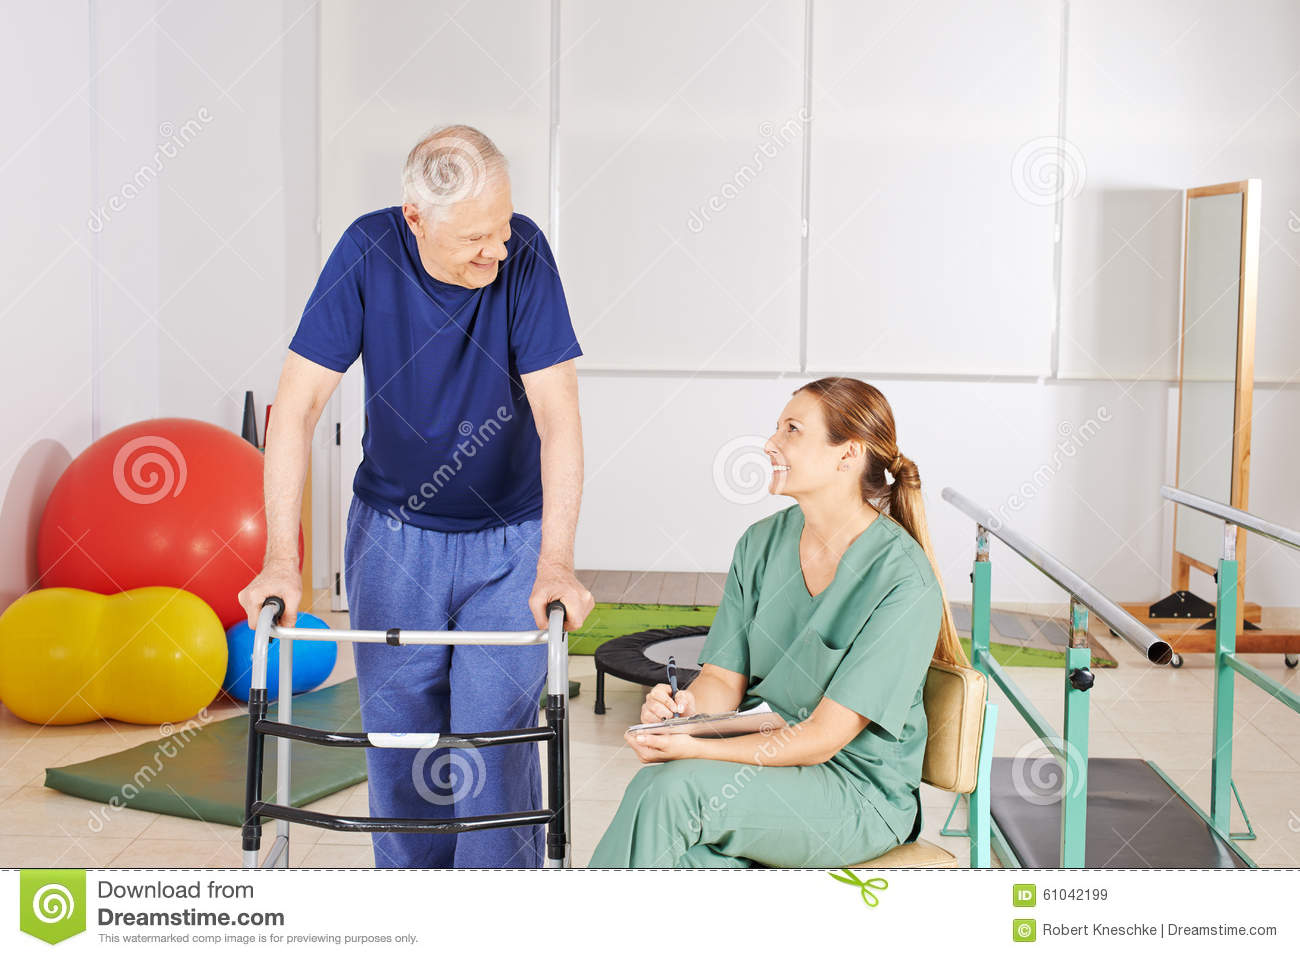 Old Man With Walker In Physical Therapy Stock Photo   Image  61042199